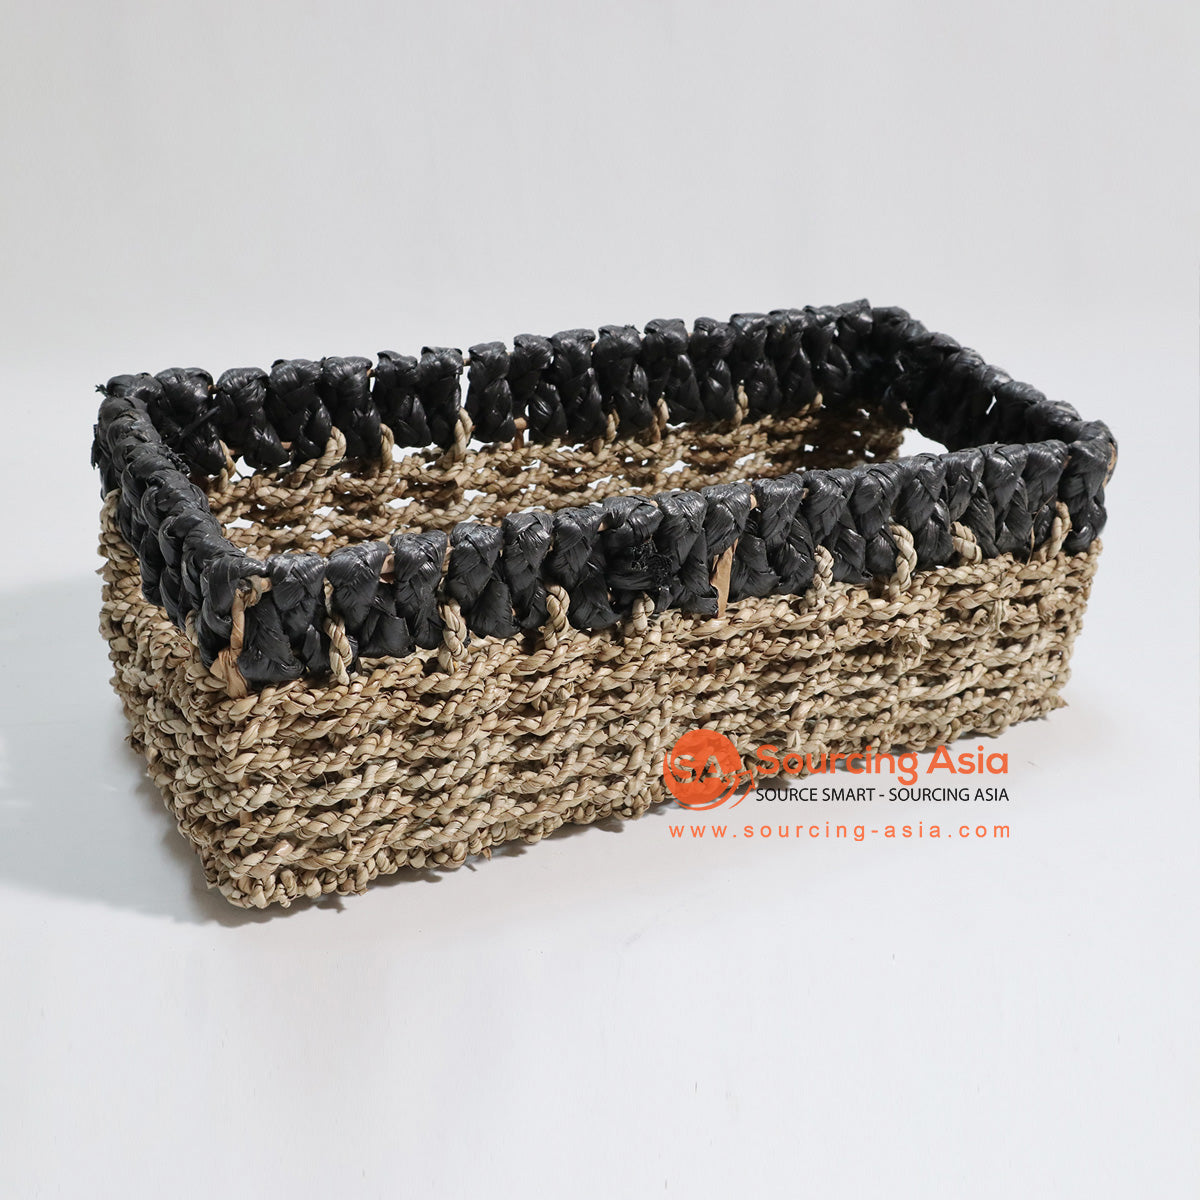 HBSC029-1 BLACK AND NATURAL SEAGRASS STORAGE BOX